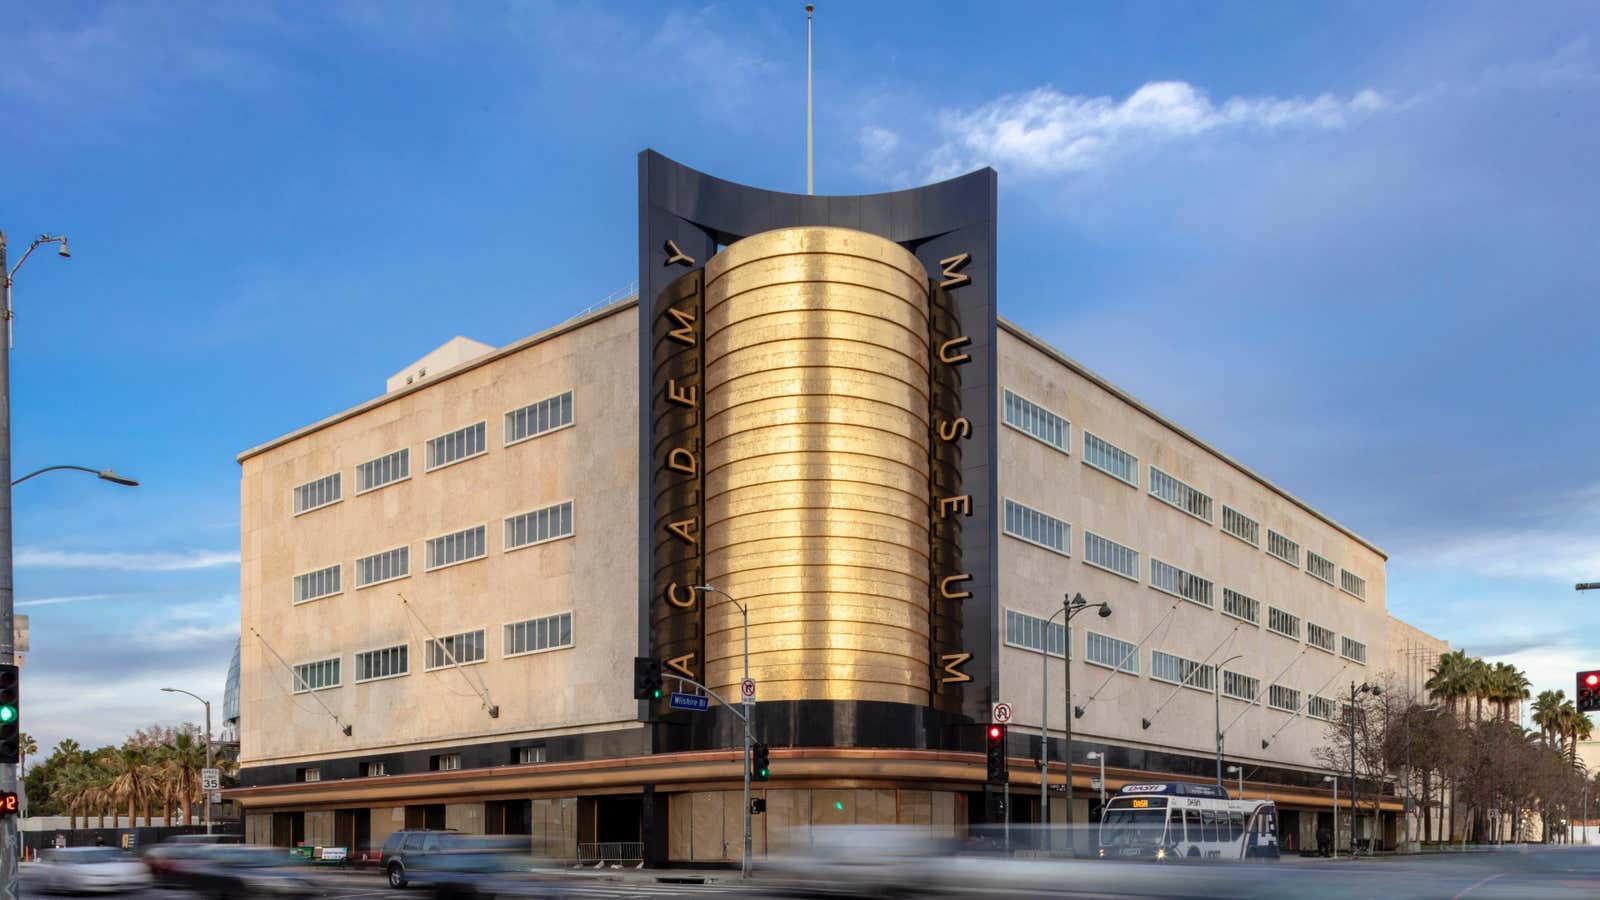 The Saban Building of the Academy Museum of Motion Pictures in Los Angeles, CA.